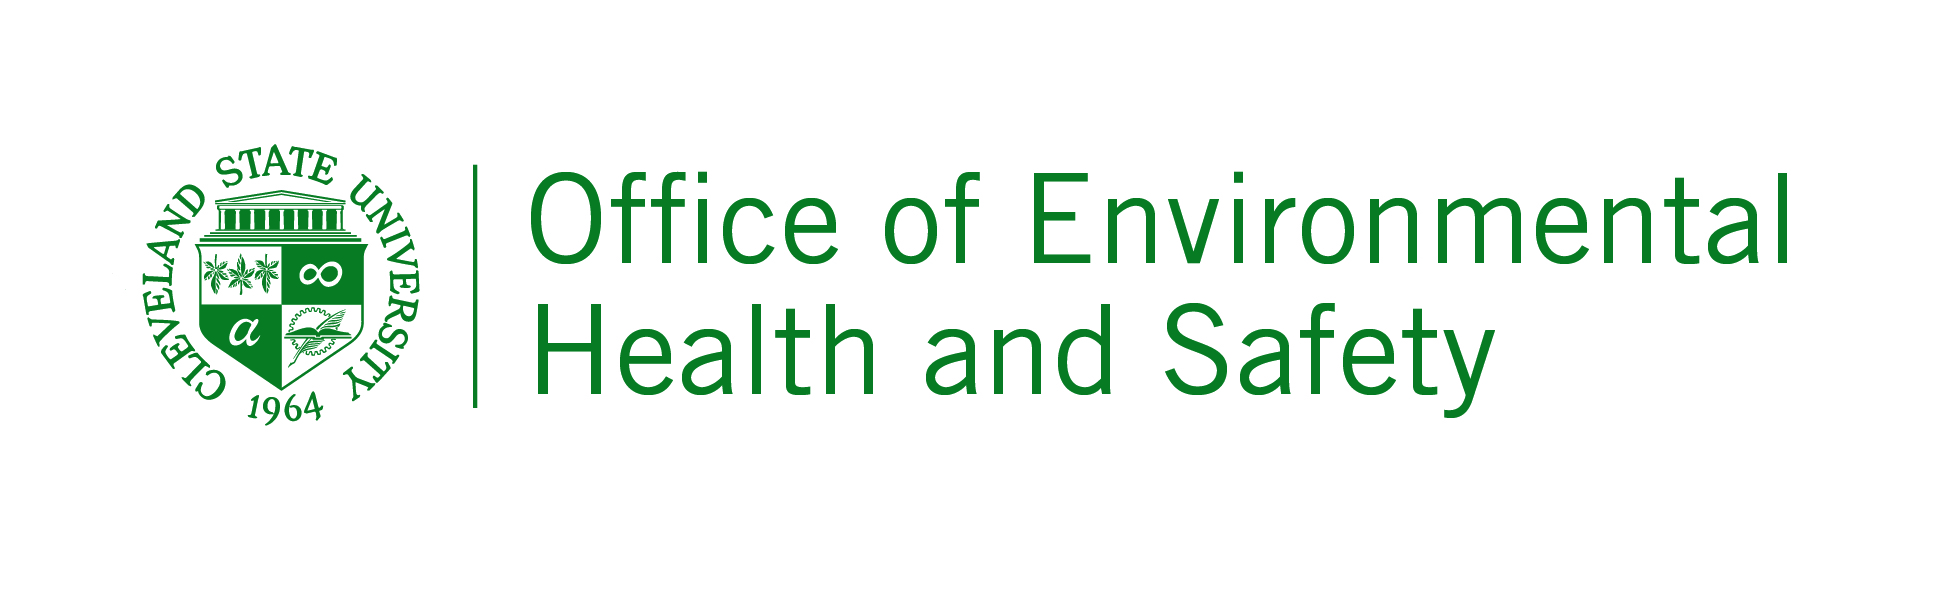 Office of Environmental Health & Safety 